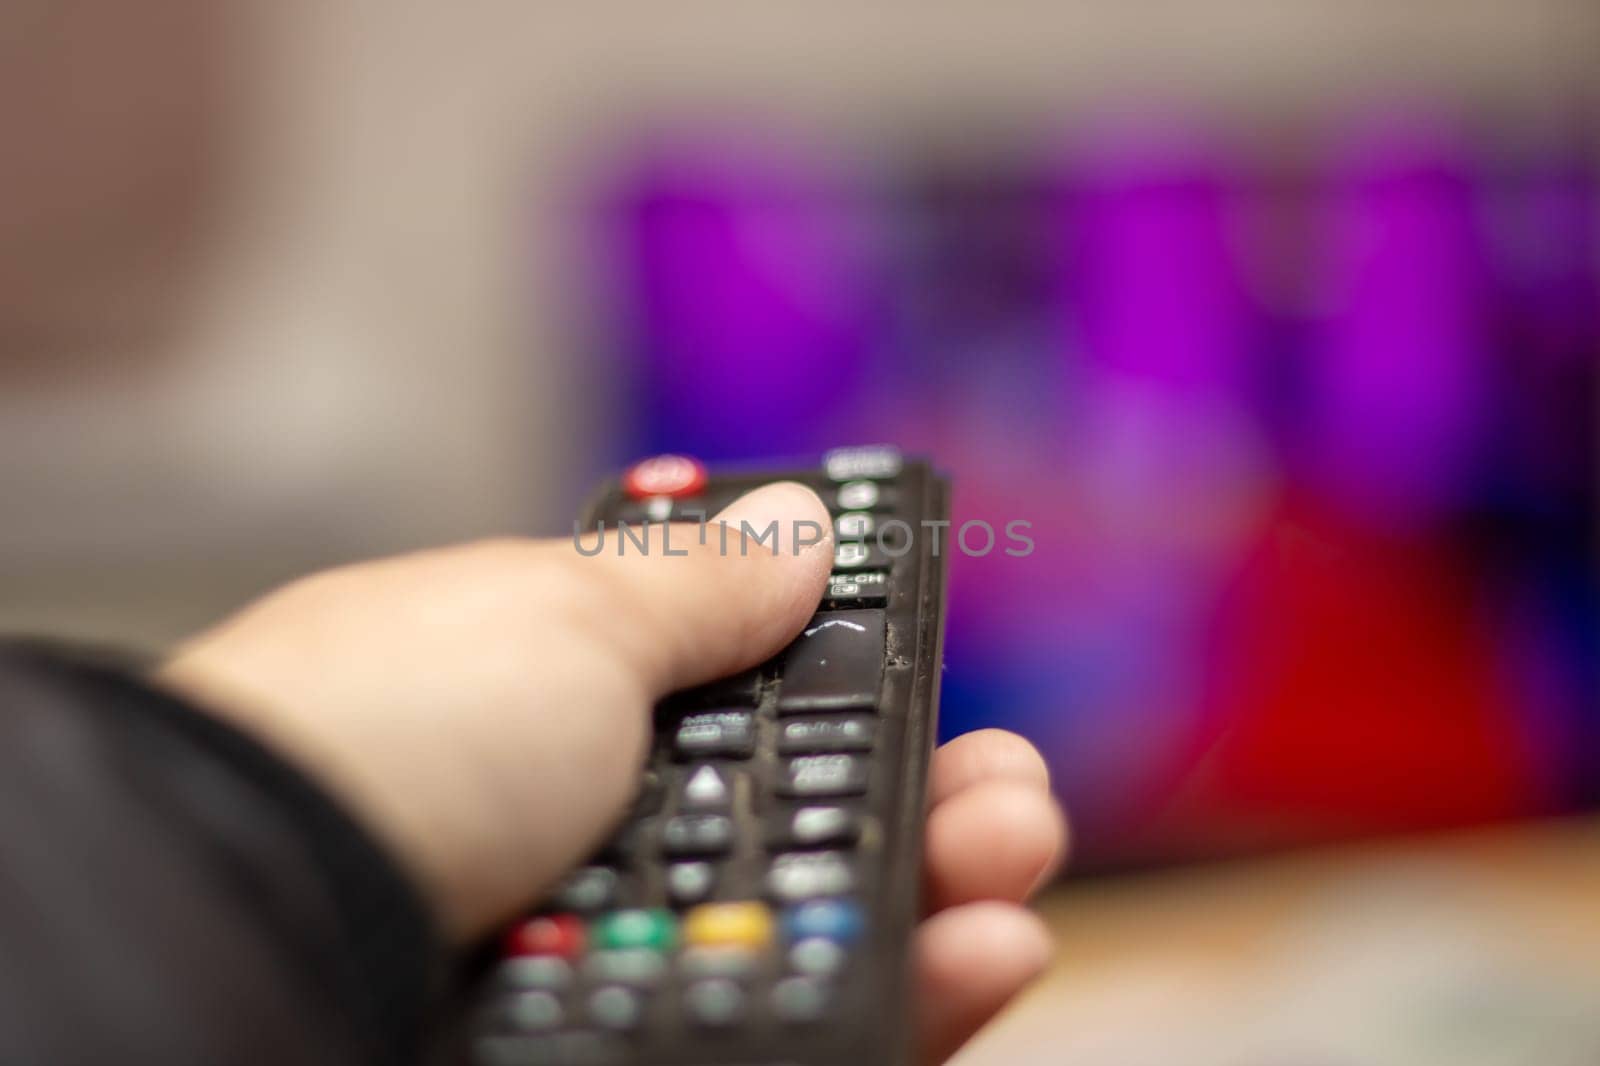 A hand is holding a remote control in front of a television, a gadget used to control electronic equipment like audio and video devices